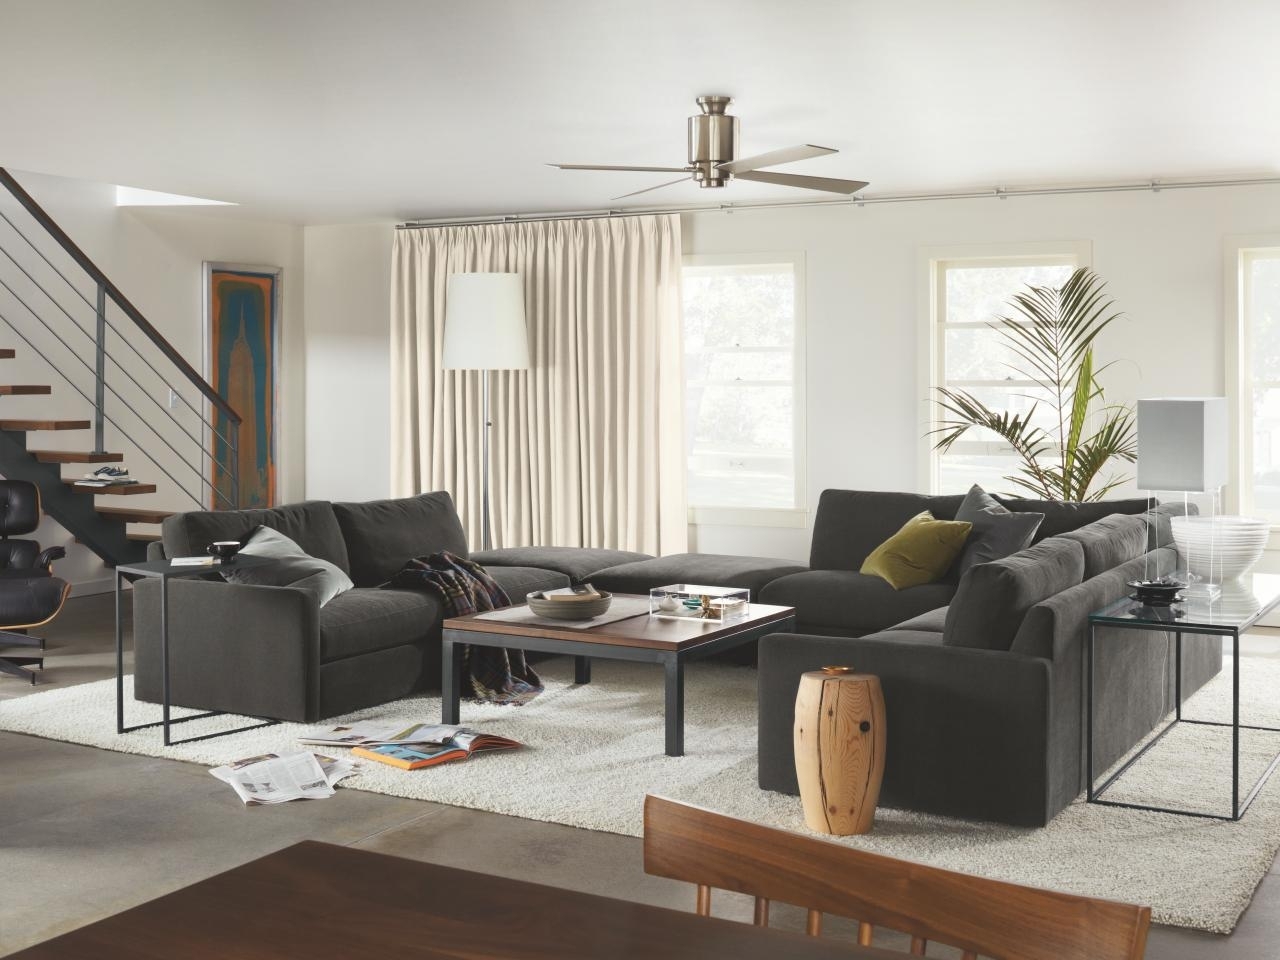 Living Room Arrangement With Sectional Sofa